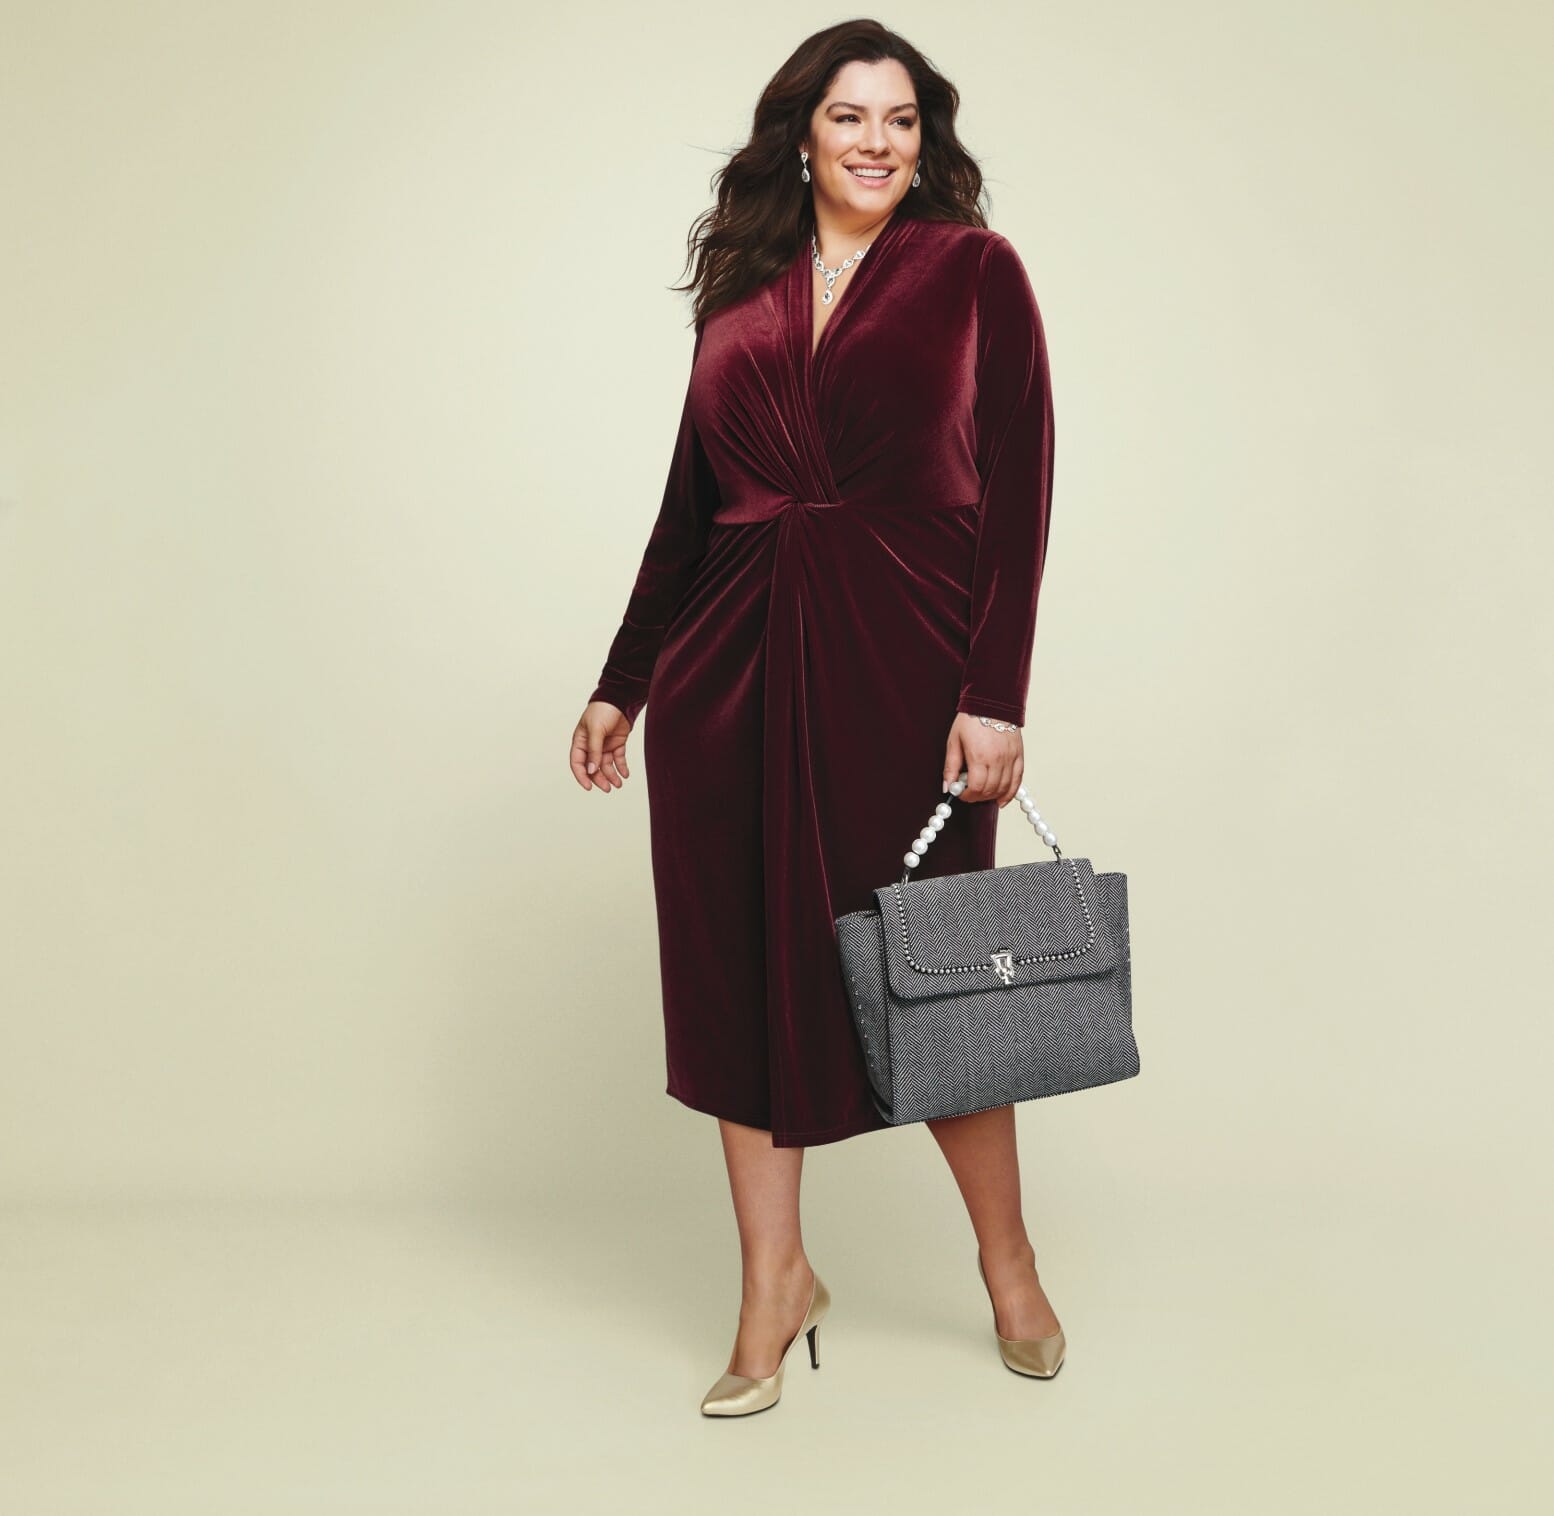 plus size model wearing a burgundy velvet dress with gold pumps and a grey bag